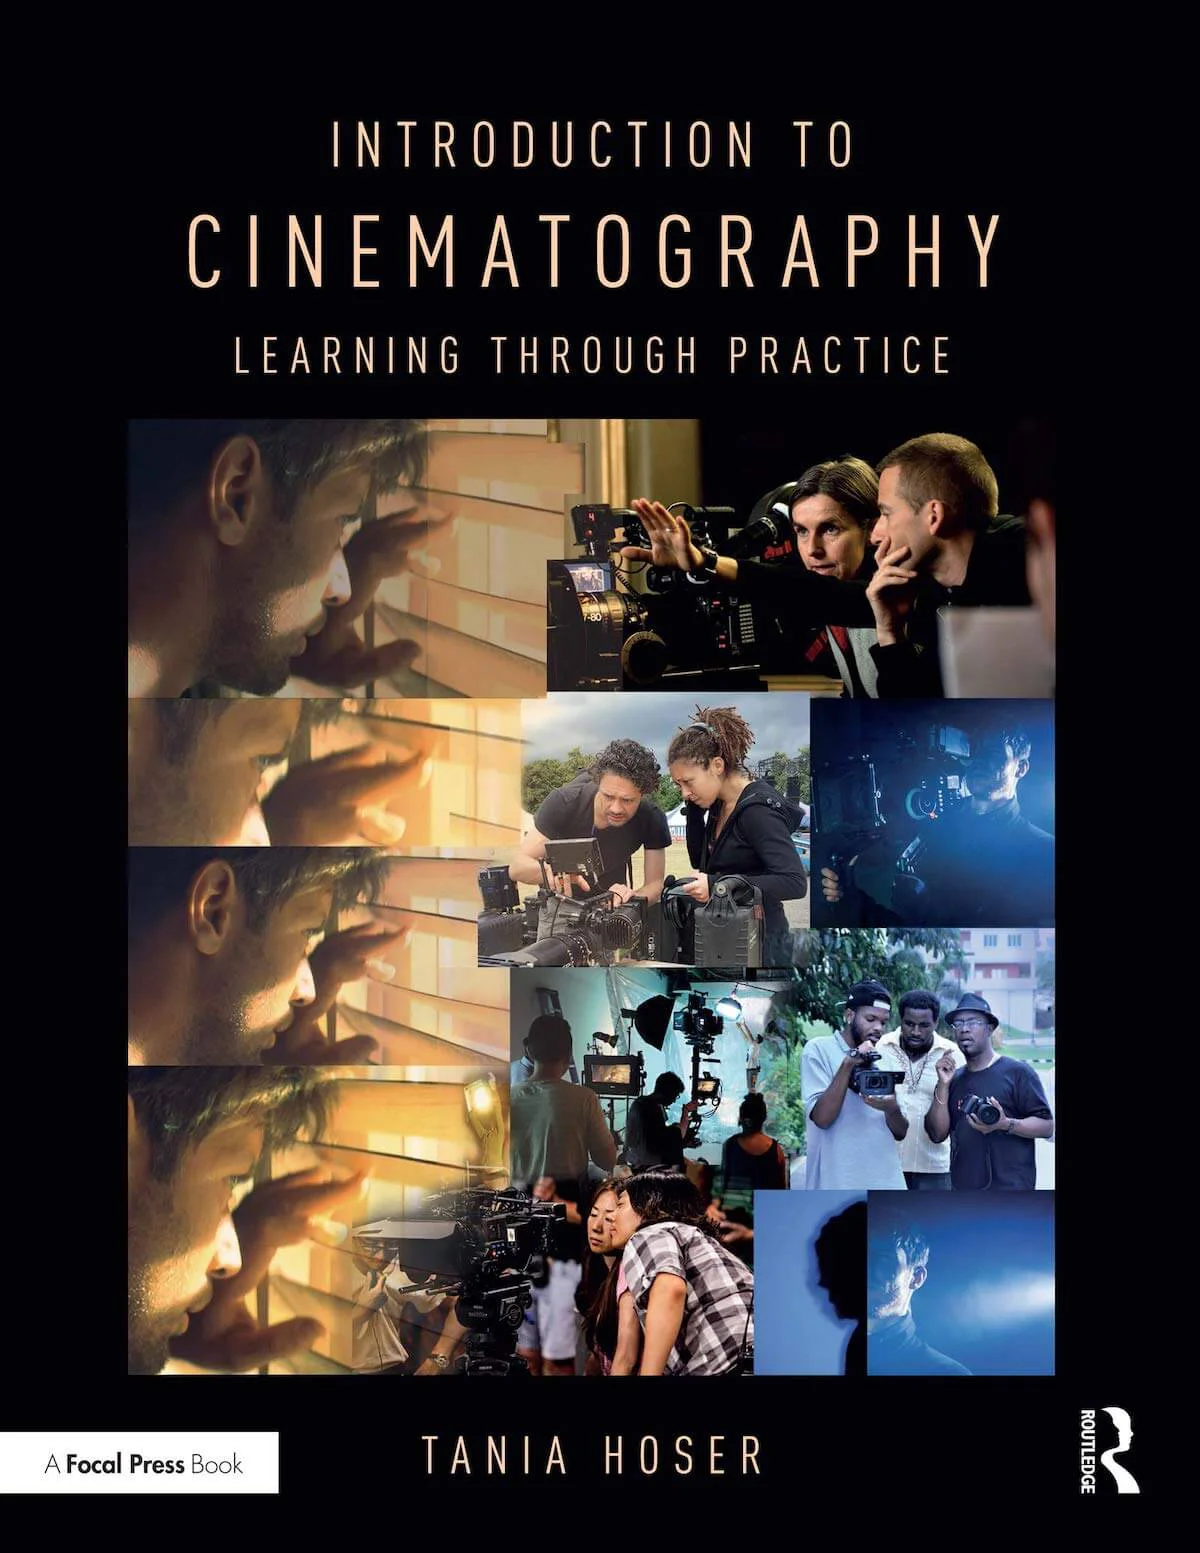 Best Cinematography Books - Tania Hoser - Introduction to Cinematography